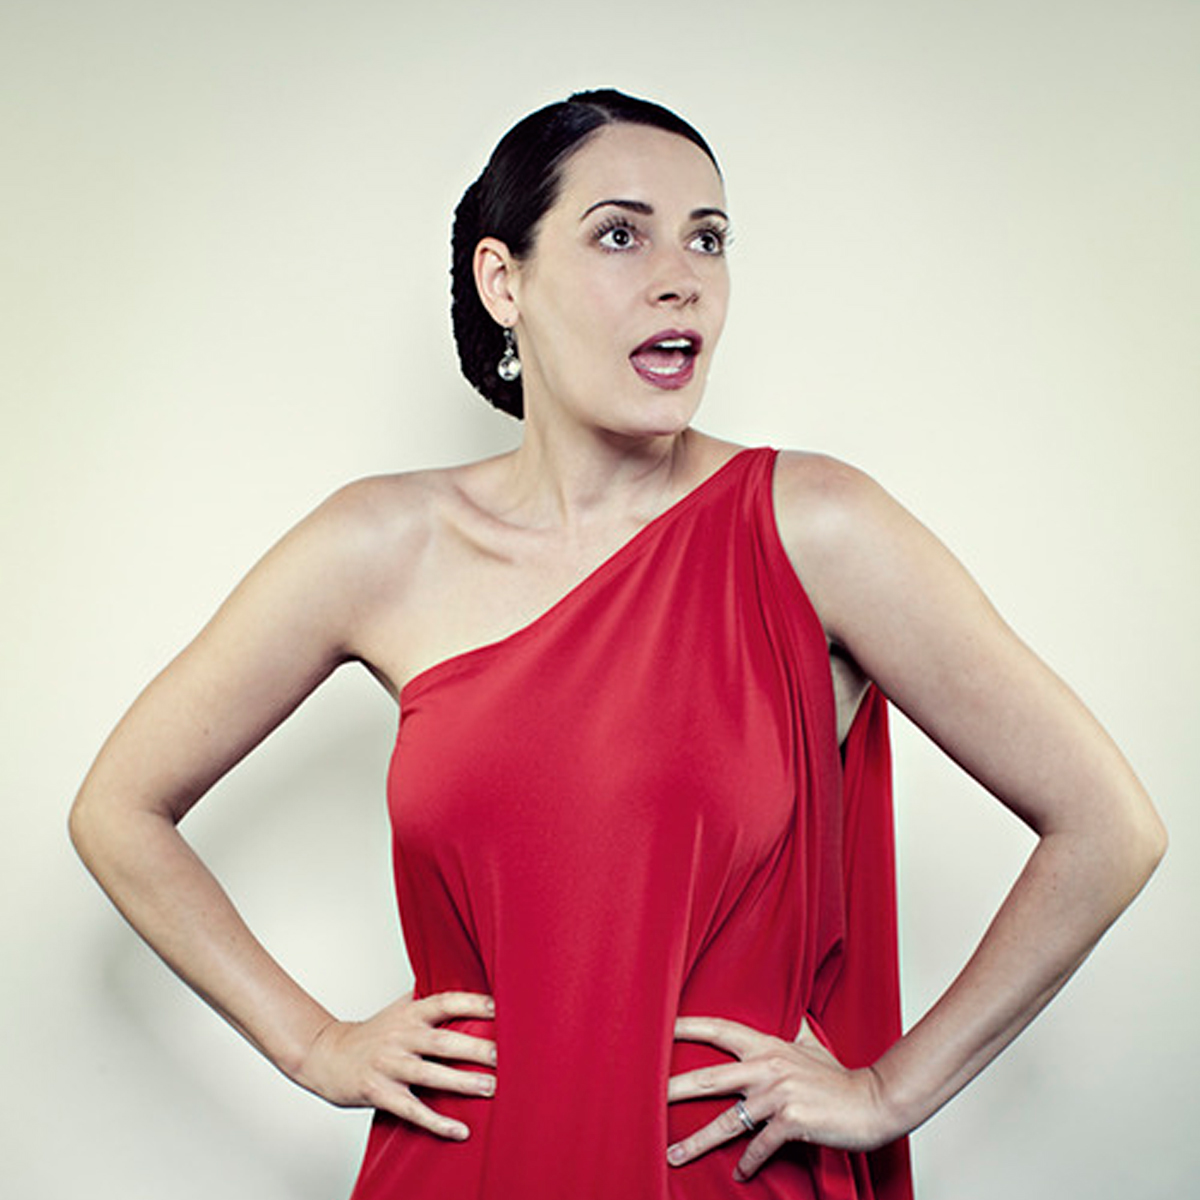 Paget brewster photoshoot